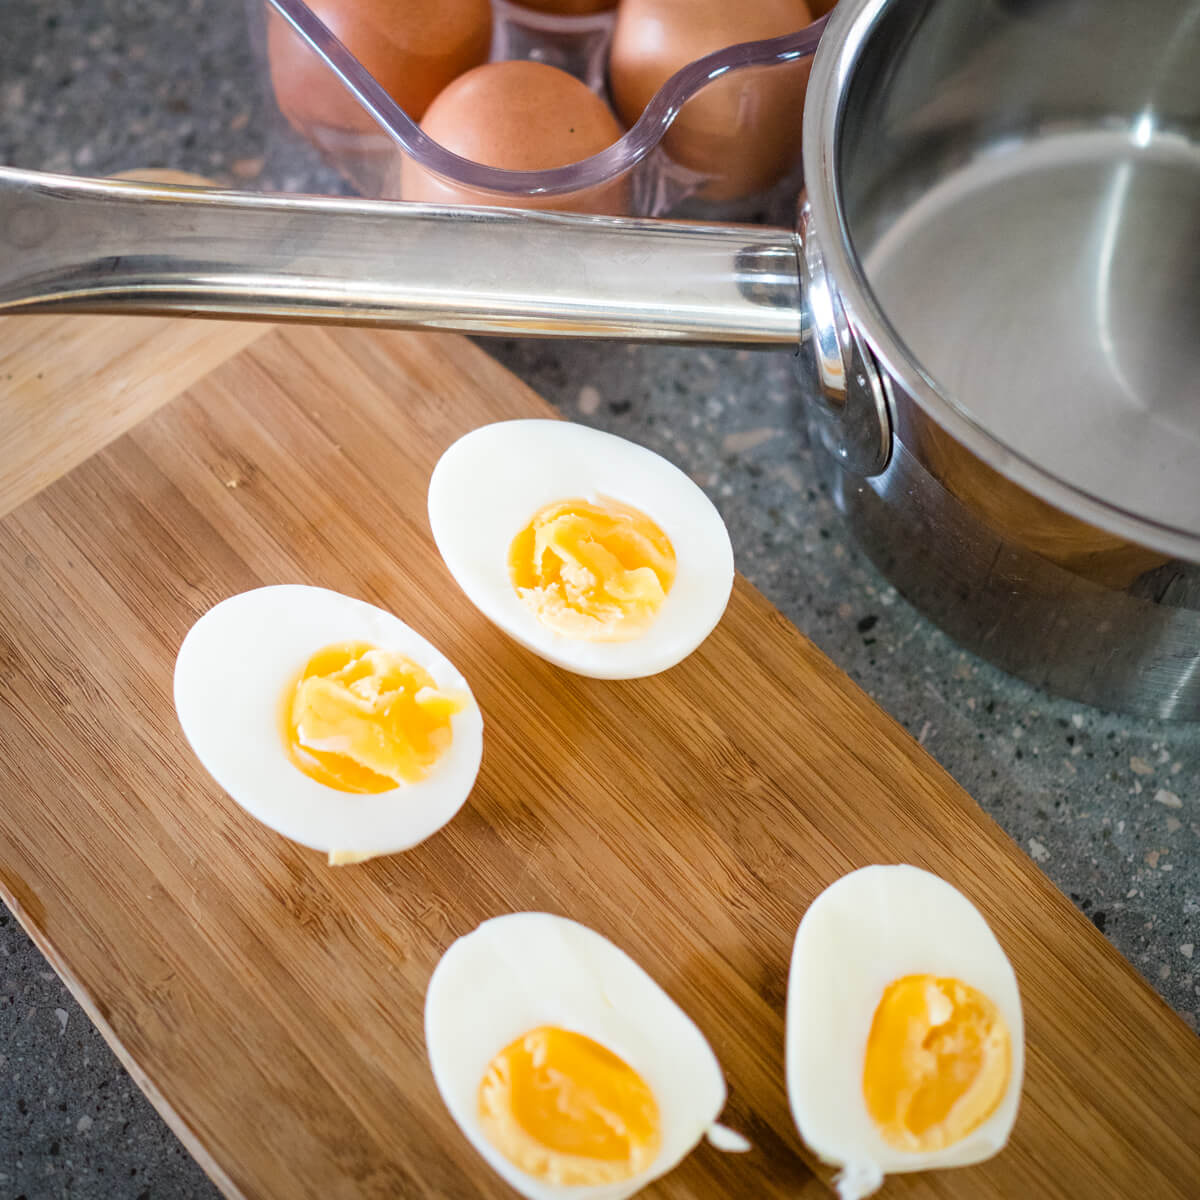 How to cook perfect hard boiled eggs